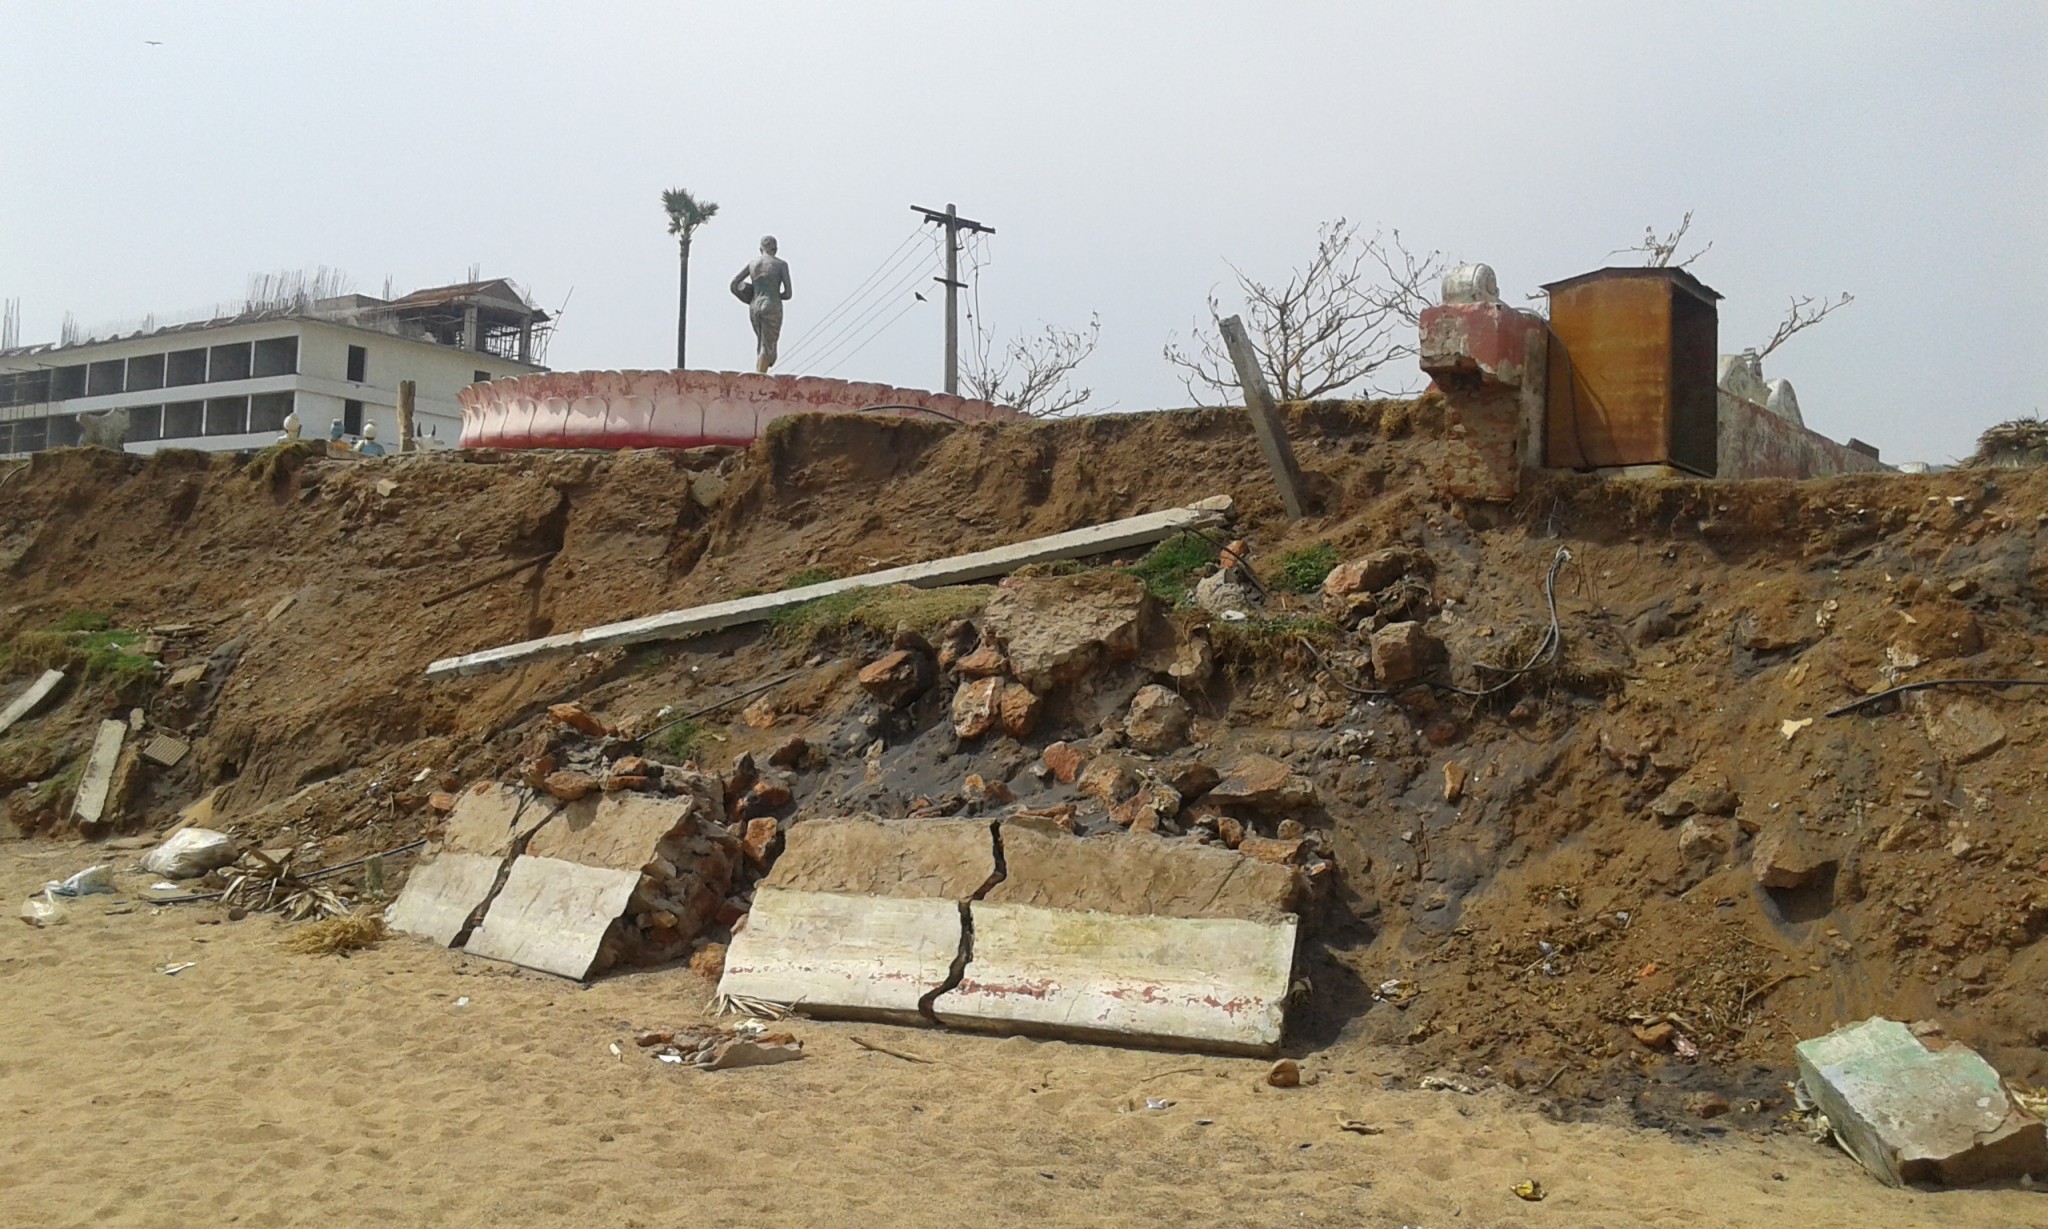 Next to the beach in Vishakhapatnam, the cyclone damaged all this.